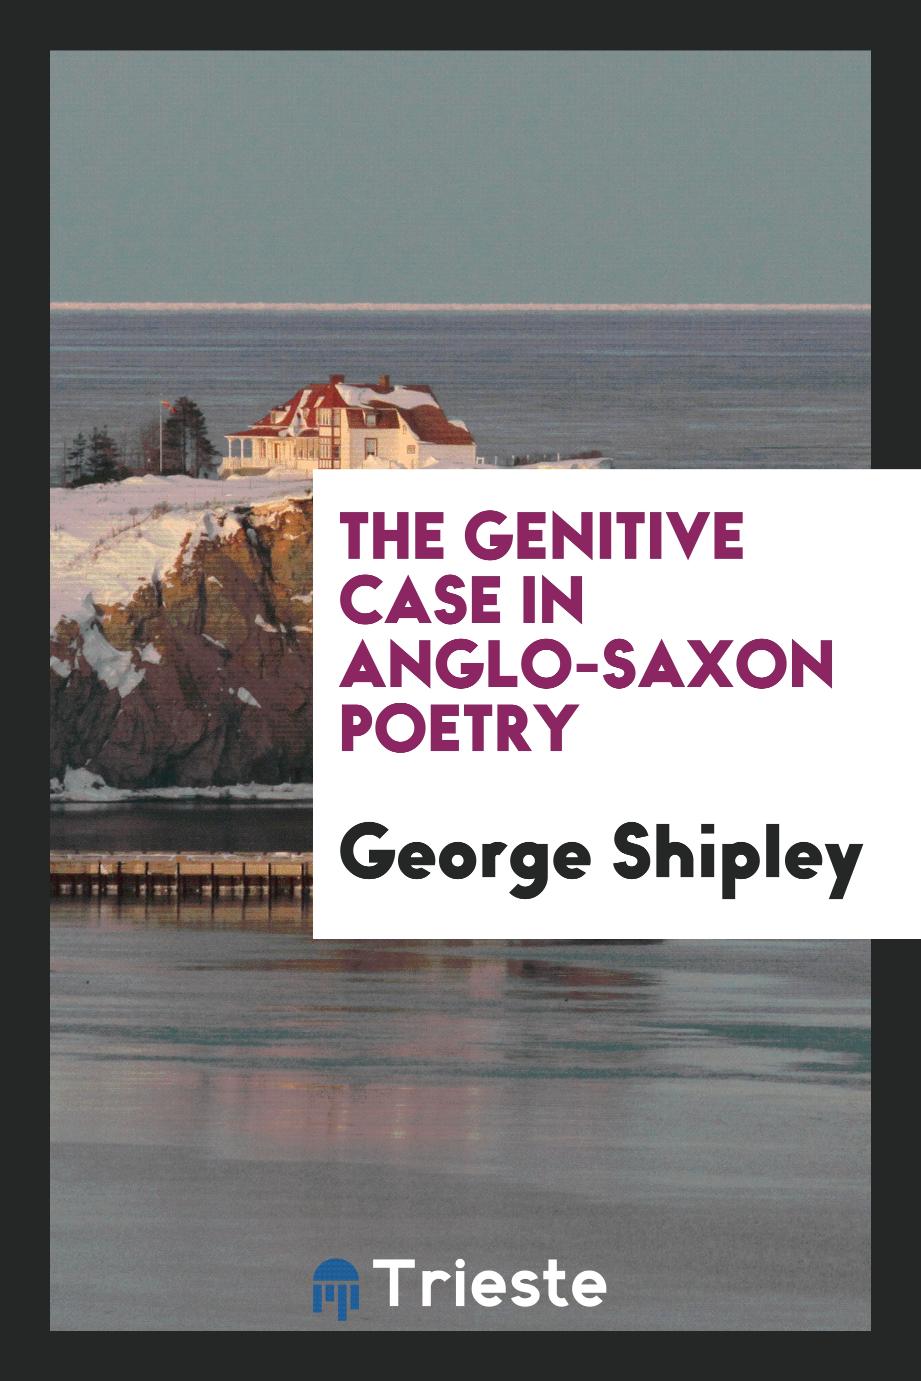 The Genitive Case in Anglo-Saxon Poetry